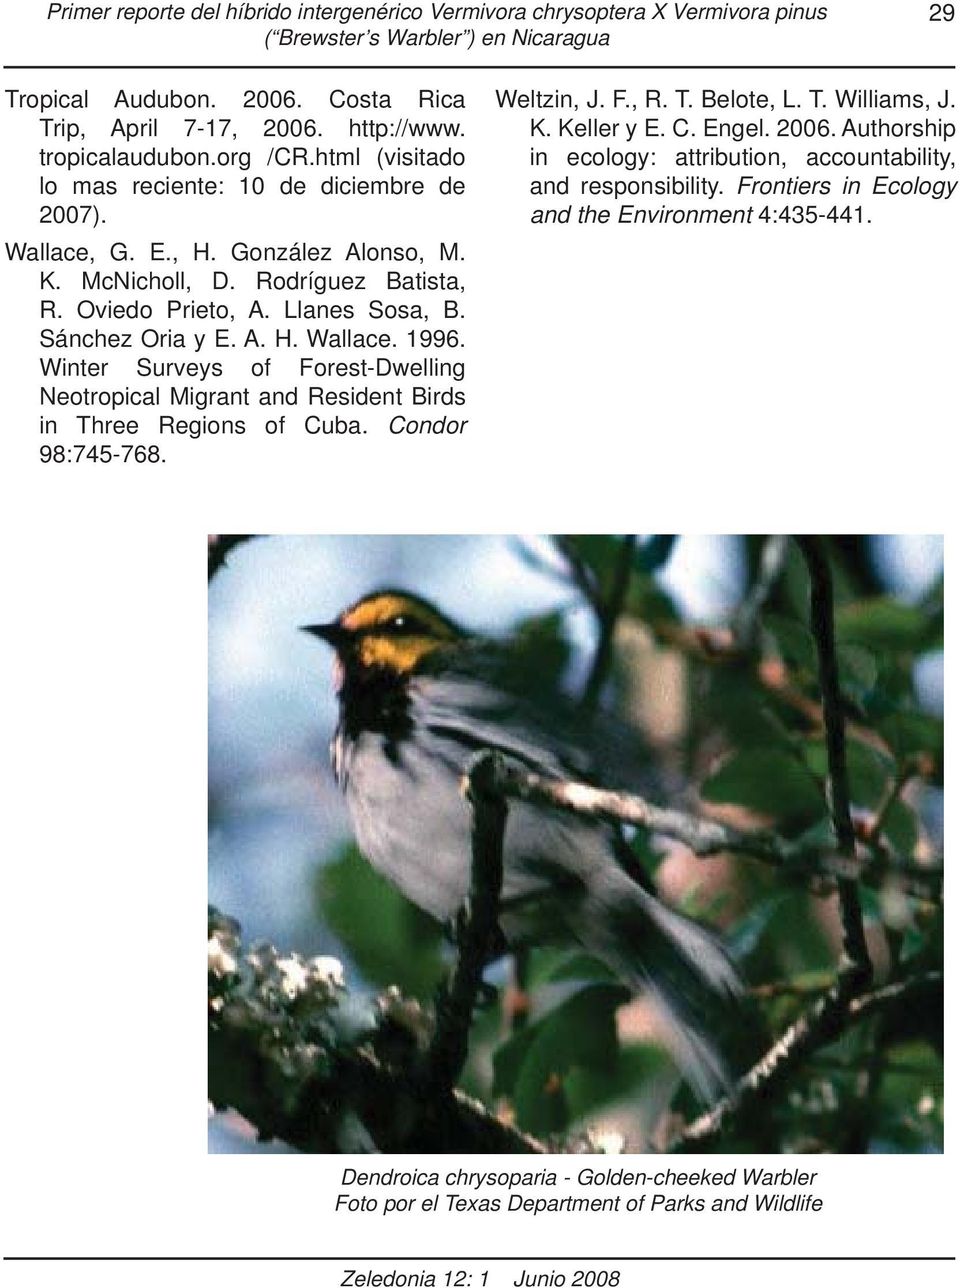 Sánchez Oria y E. A. H. Wallace. 1996. Winter Surveys of Forest-Dwelling Neotropical Migrant and Resident Birds in Three Regions of Cuba. Condor 98:745-768. Weltzin, J. F., R. T. Belote, L. T. Williams, J.